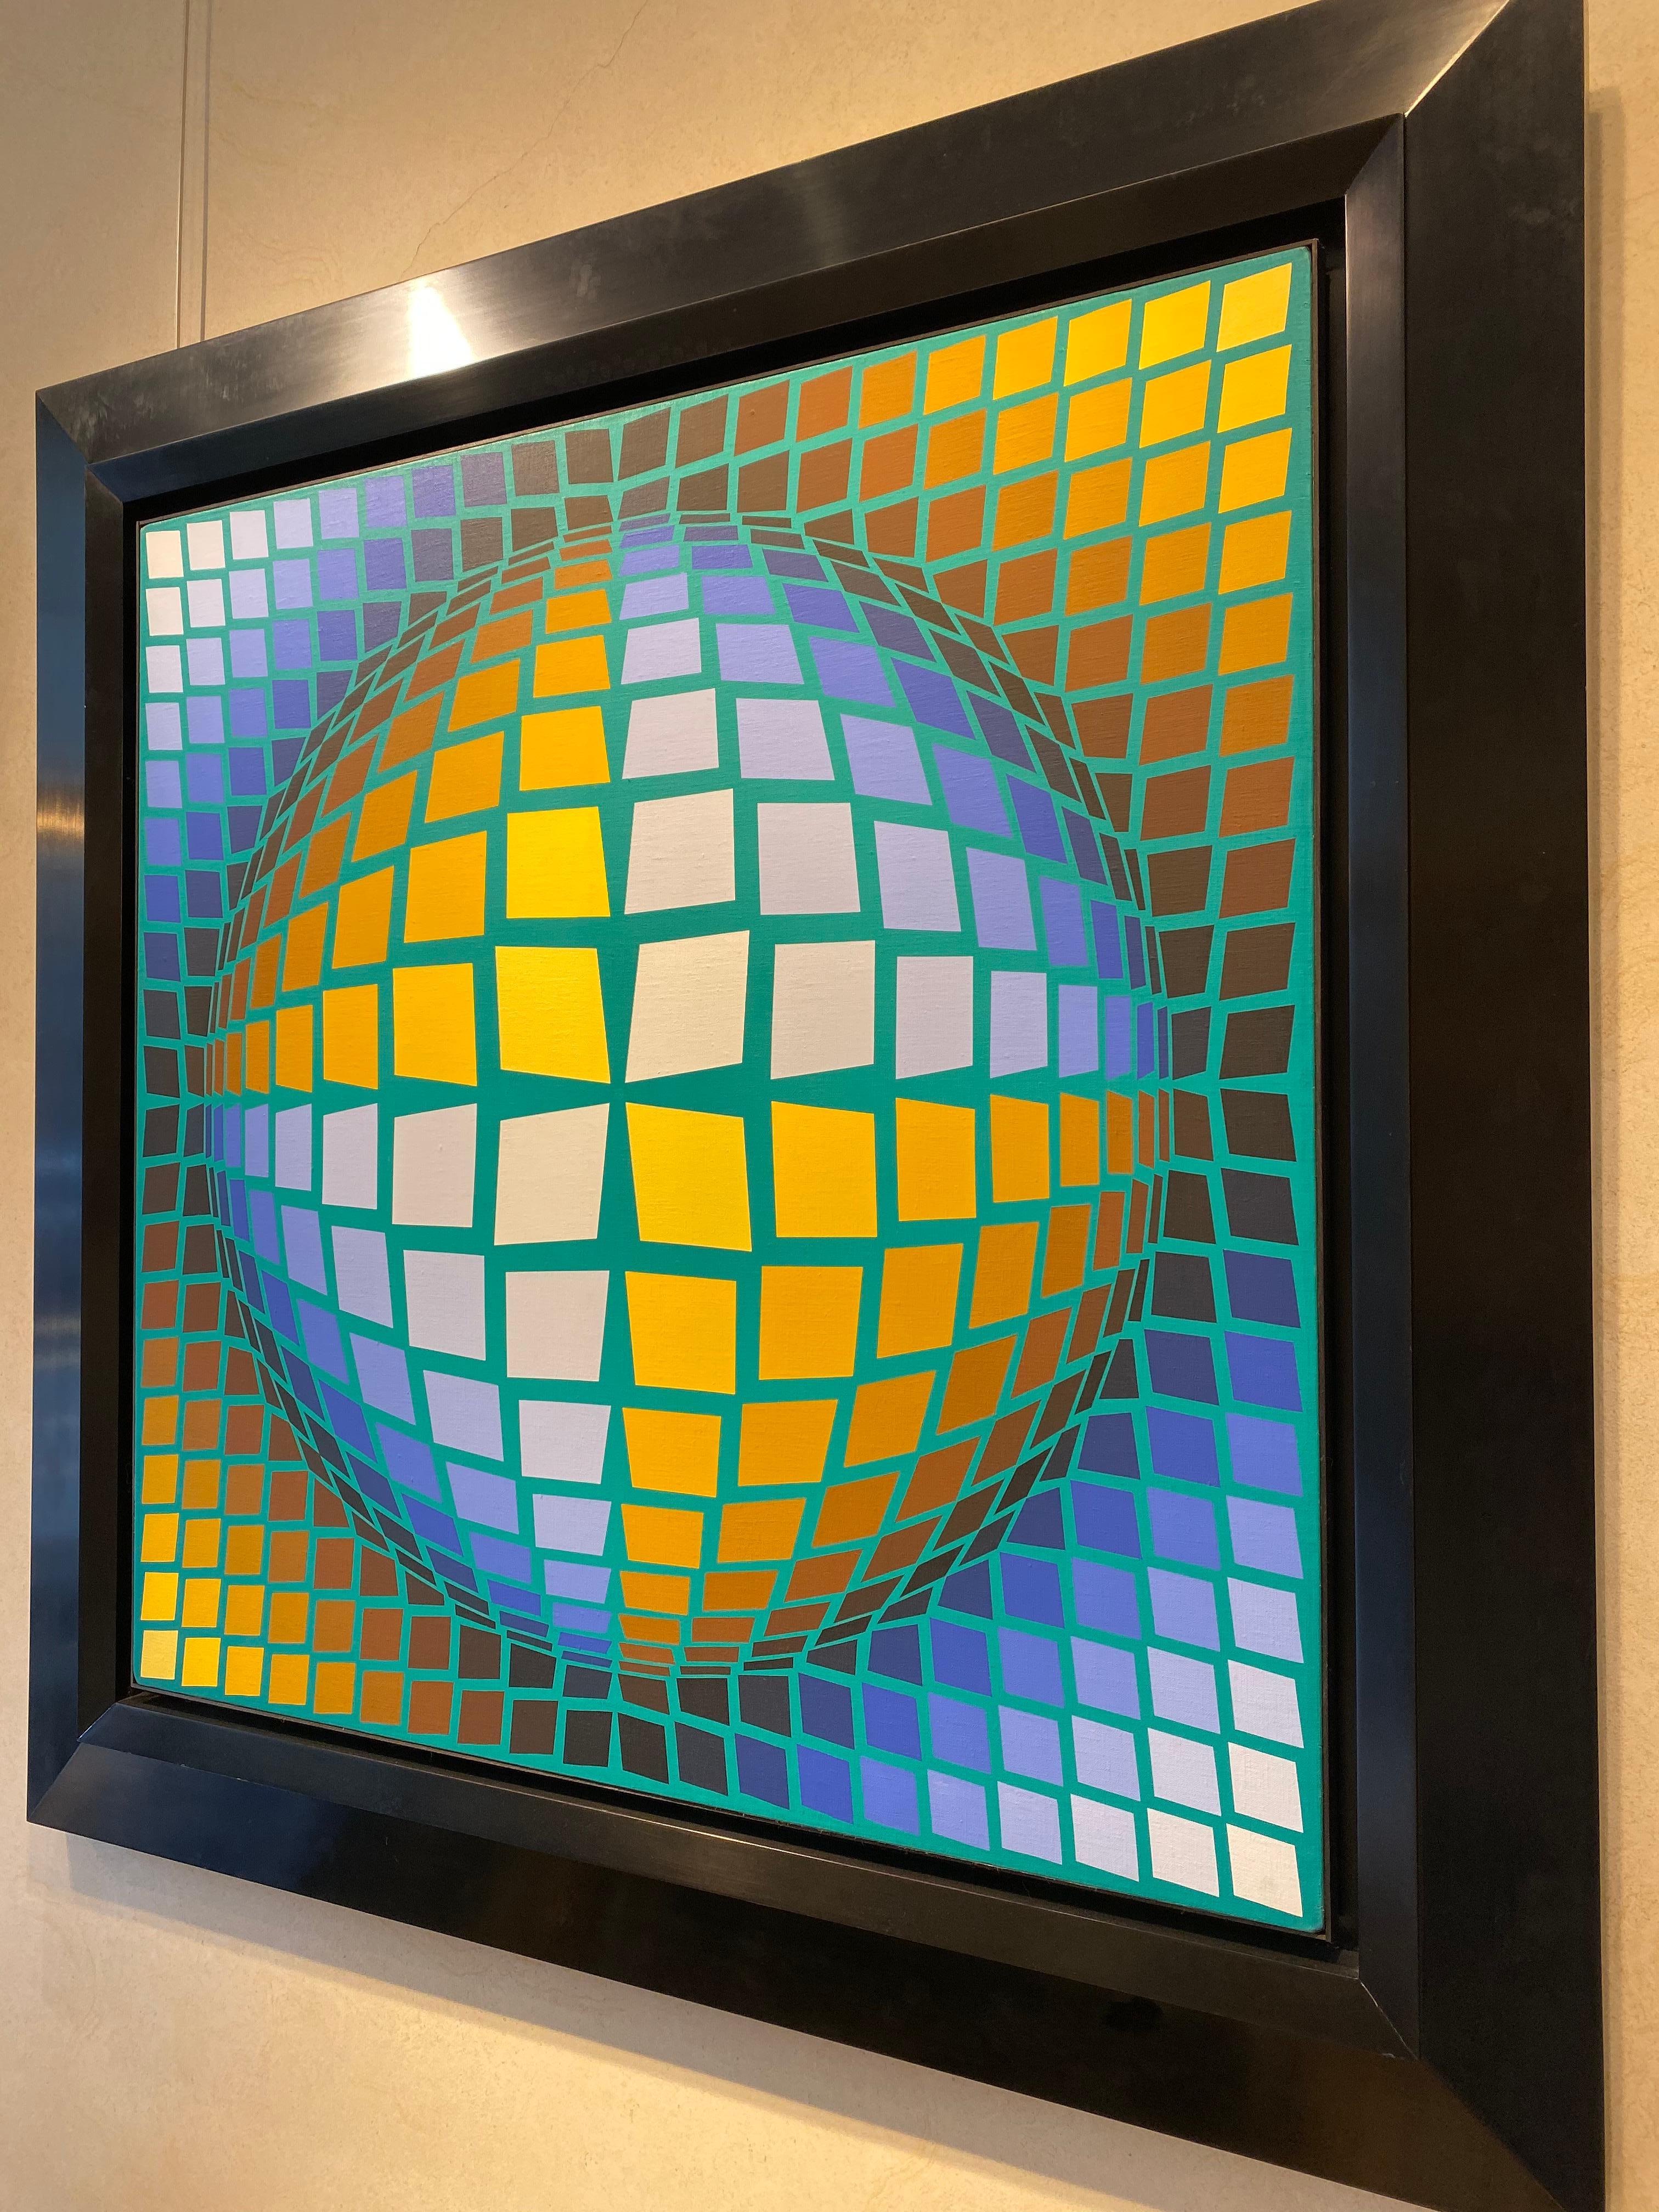 Tromba - Op Art Painting by Victor Vasarely